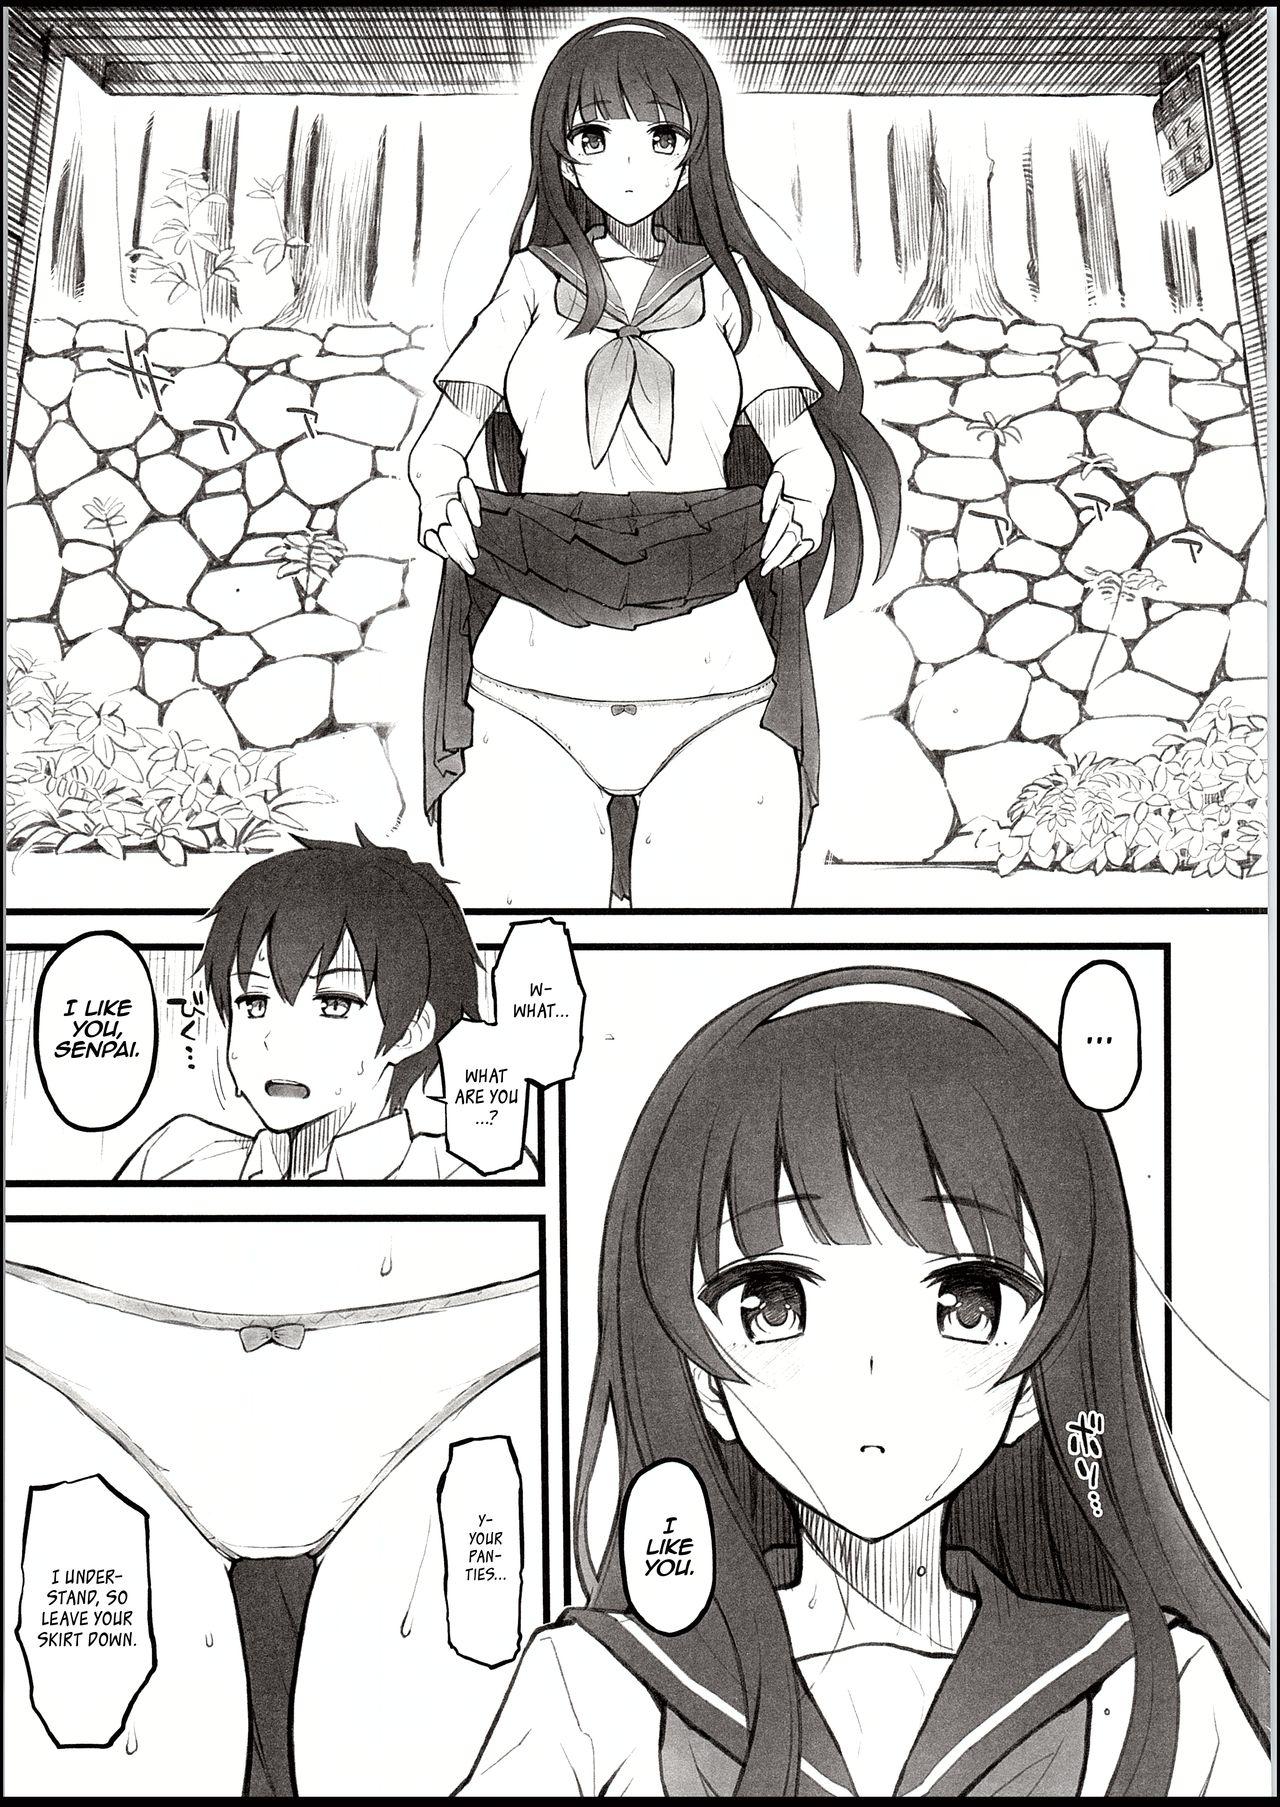 Highheels Natsu no Hi, Kouhai to, Bus-tei de. | On a Summer Day, with My Kouhai, at the Bus Stop. - Original Squirt - Page 6